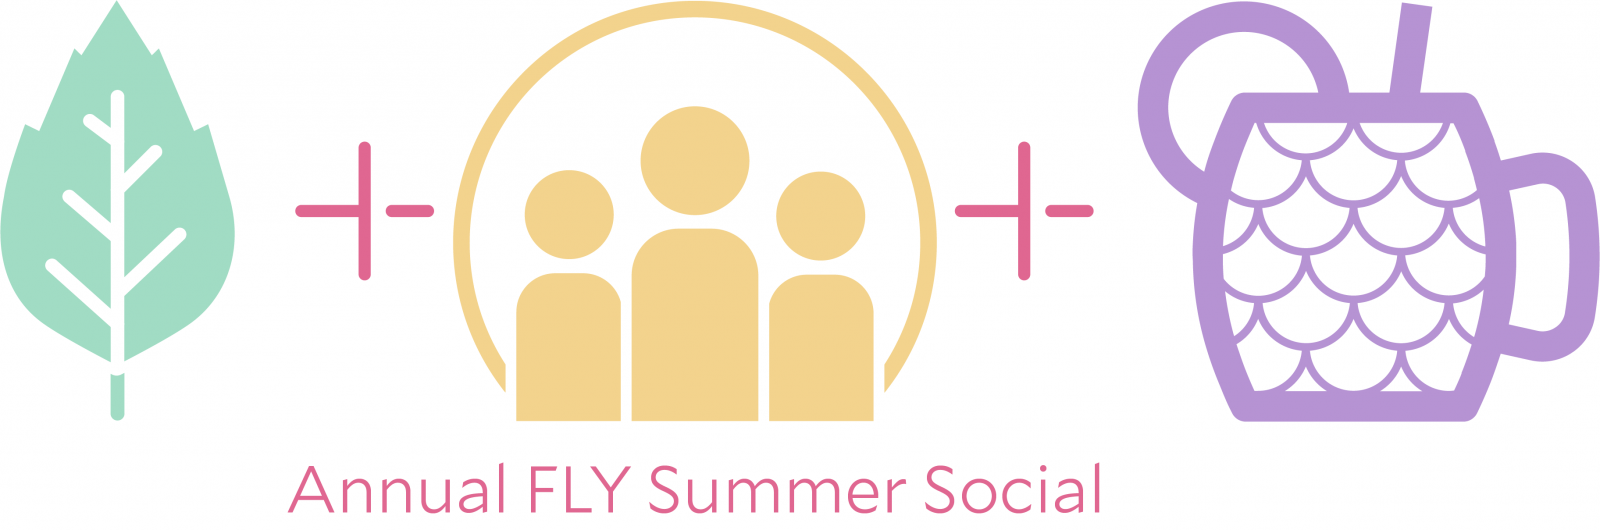 "Annual FLY Summer Social" logo with three icons: 1) Elm Leaf, 2) A group of three people, 3) a Drink with a straw